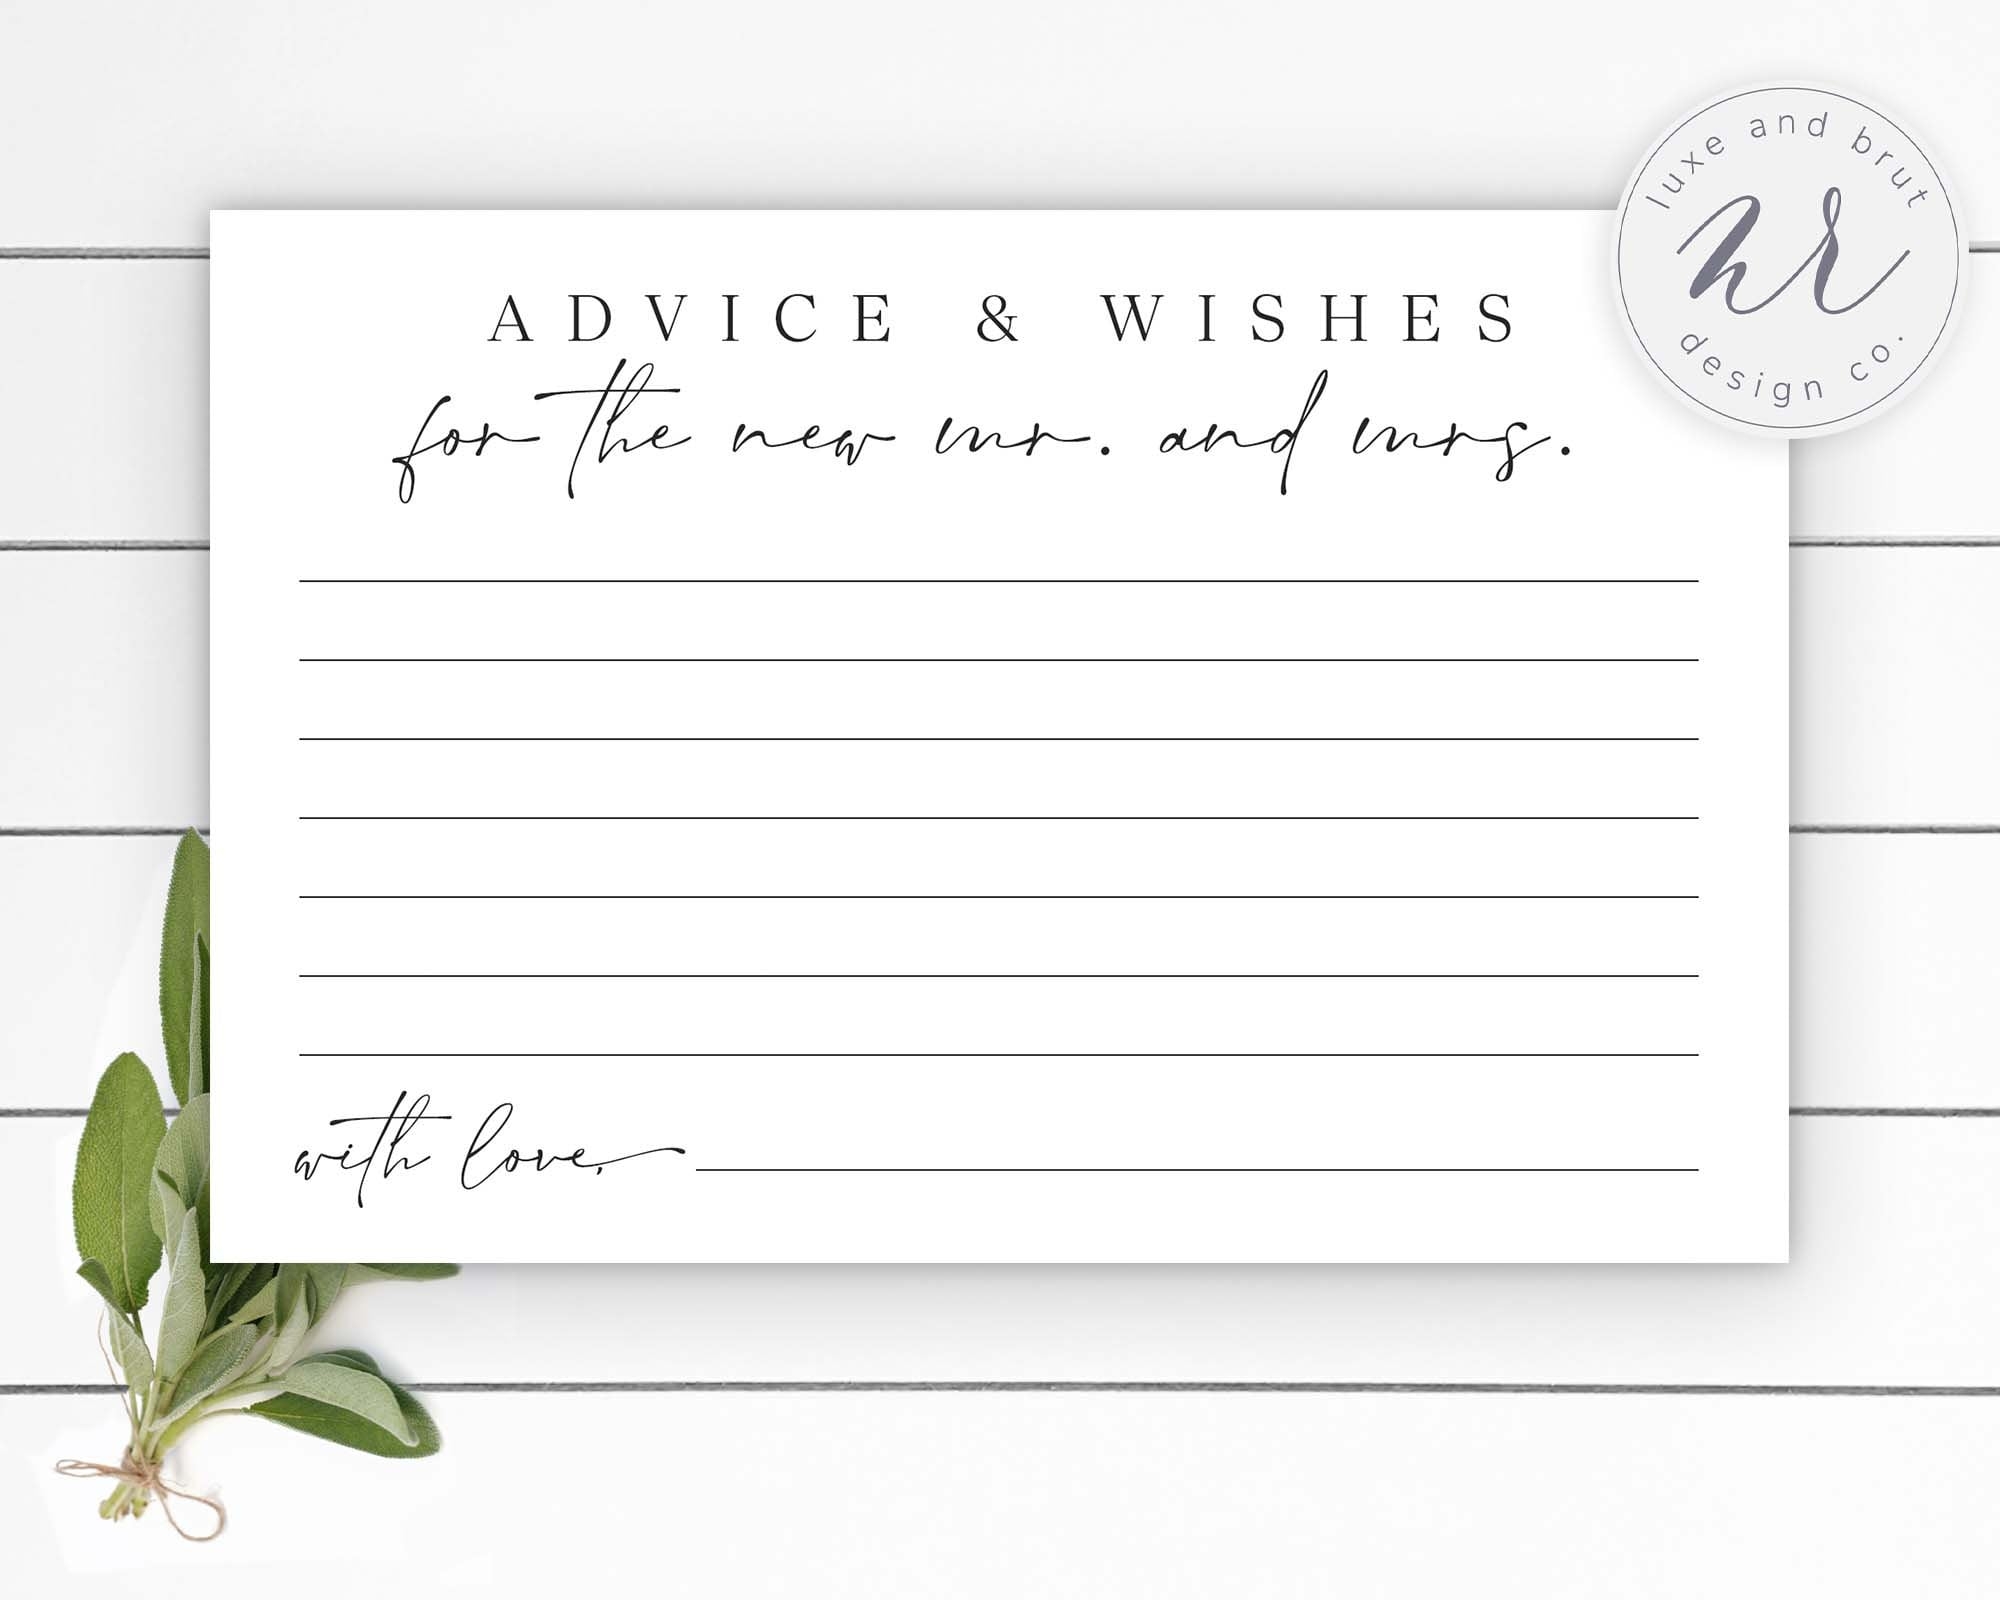 Bridal Shower Advice Wishes For The New Mr And Mrs With FREE Matching Sign Wedding Advice Cards Games DIY - Free Printable Bridal Shower Advice Cards